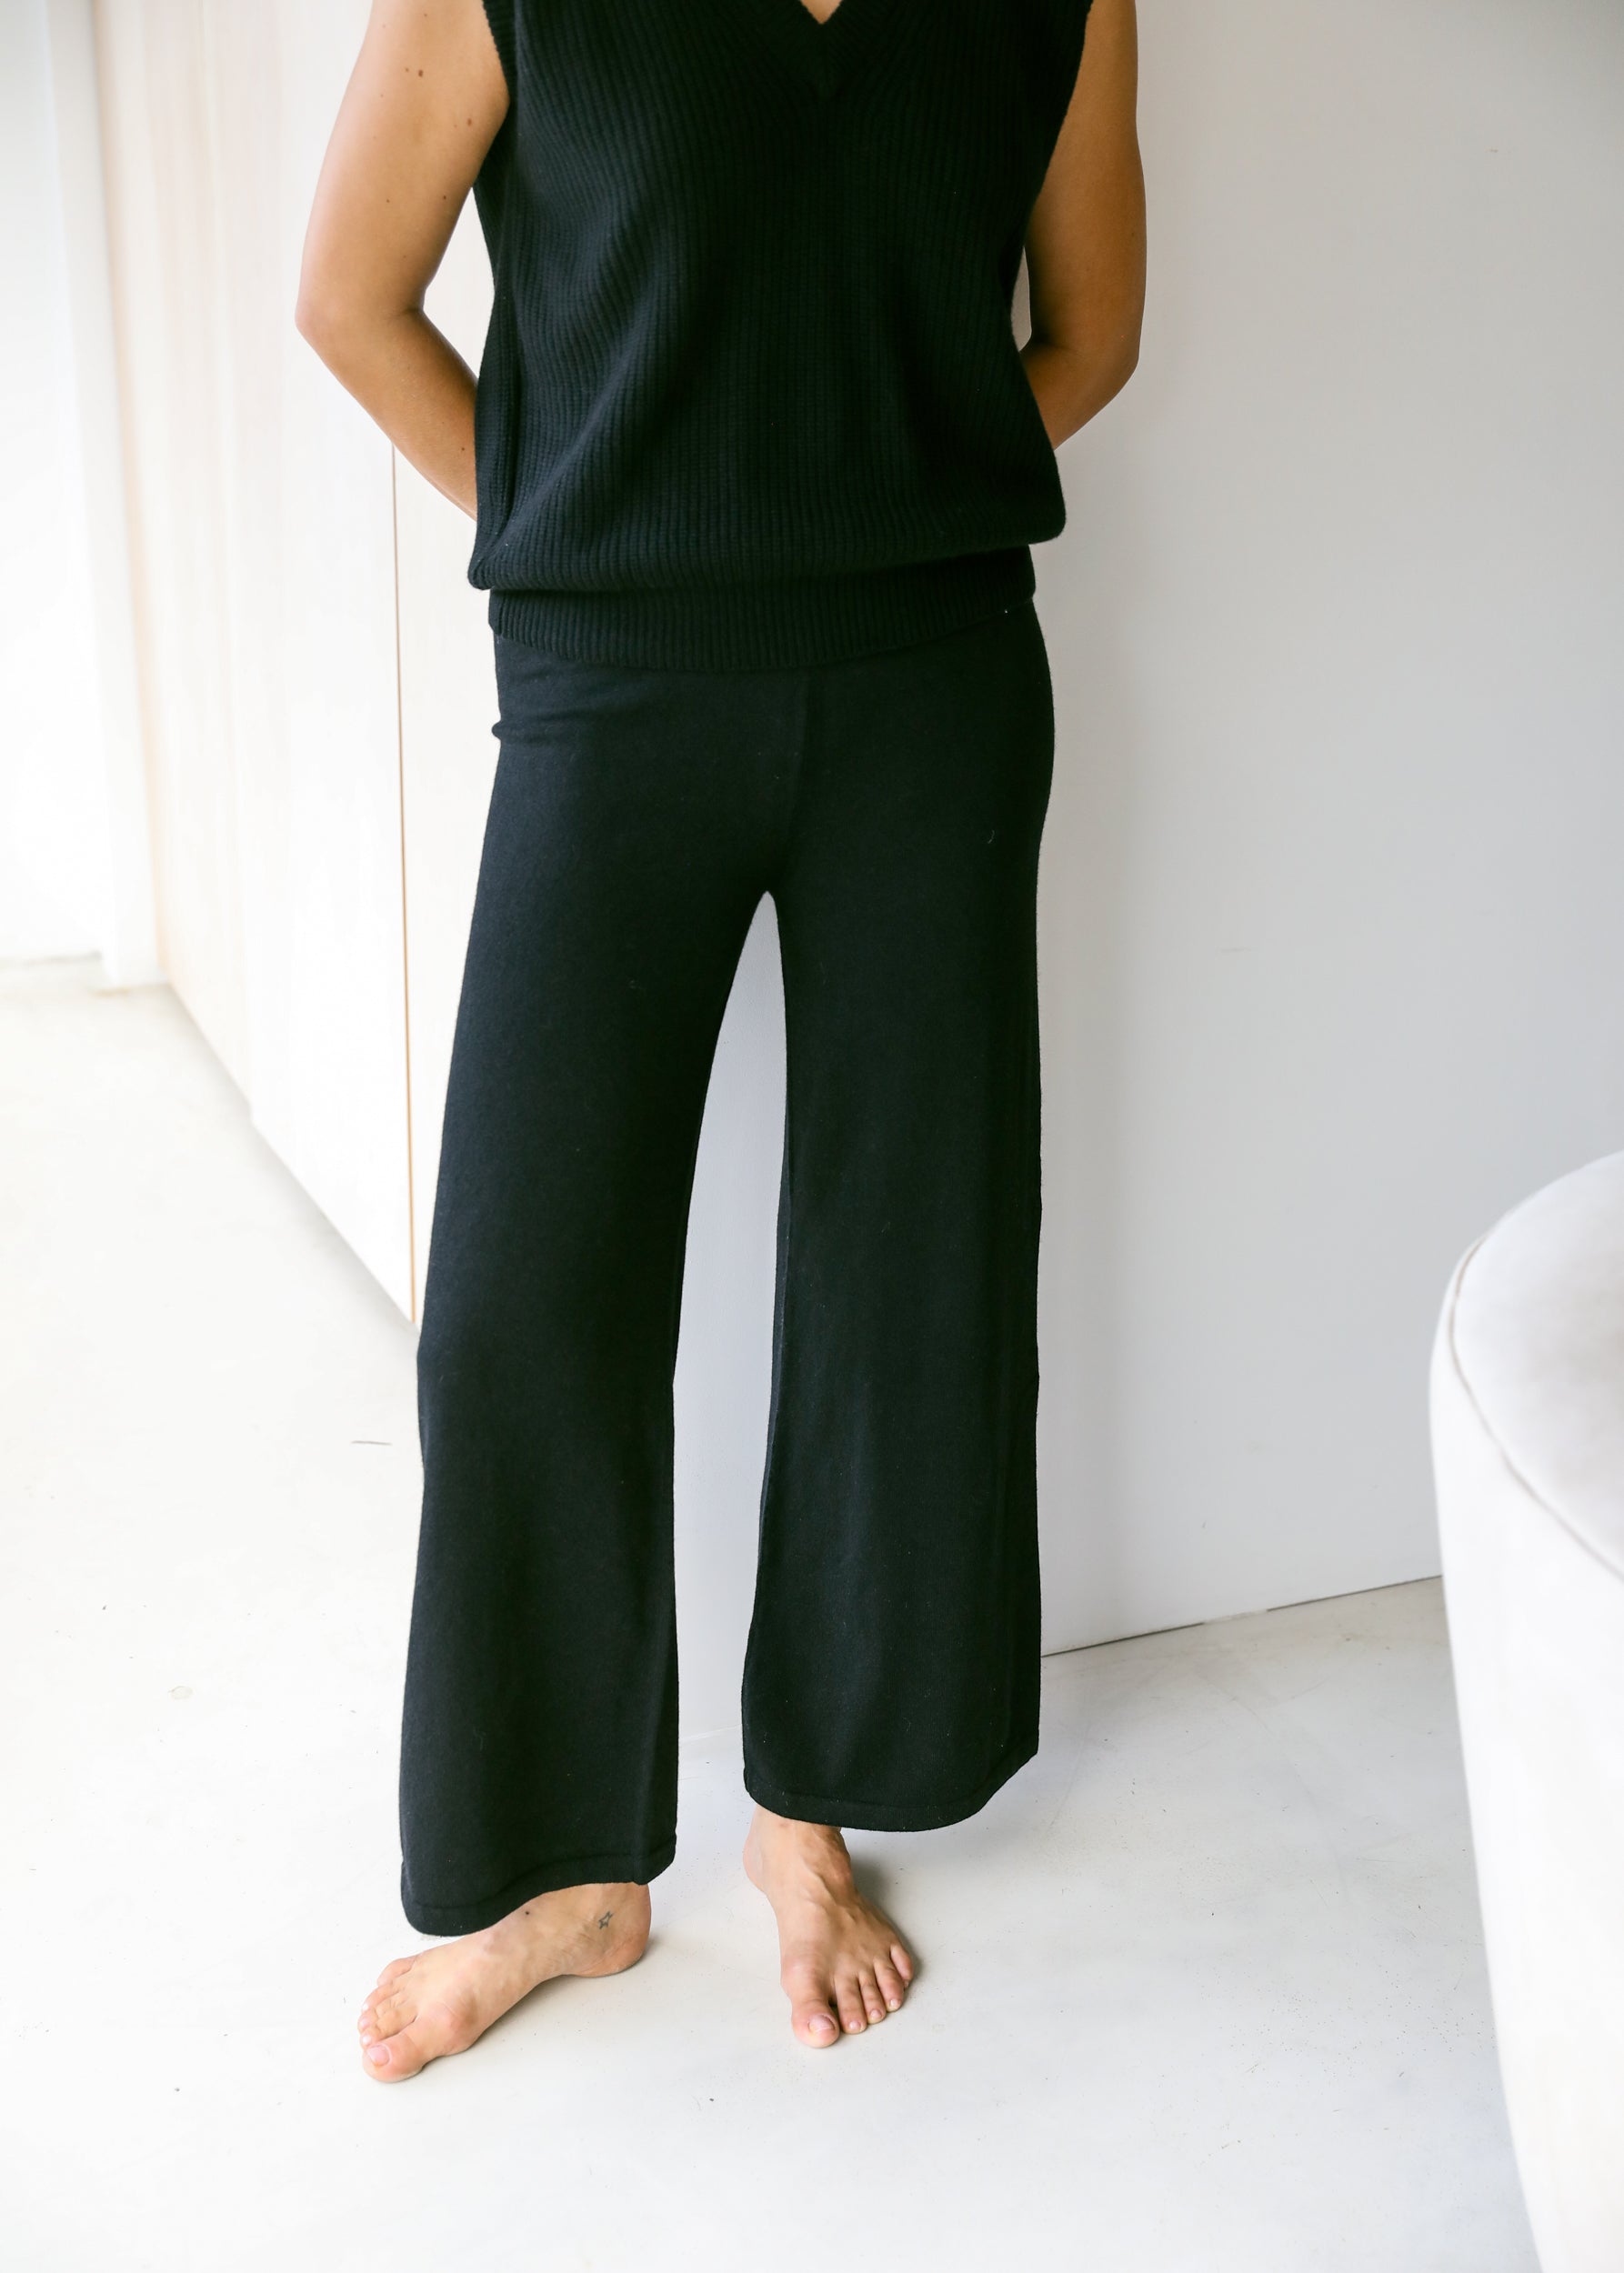 Estella NYC Camille Pants in Black Cashmere